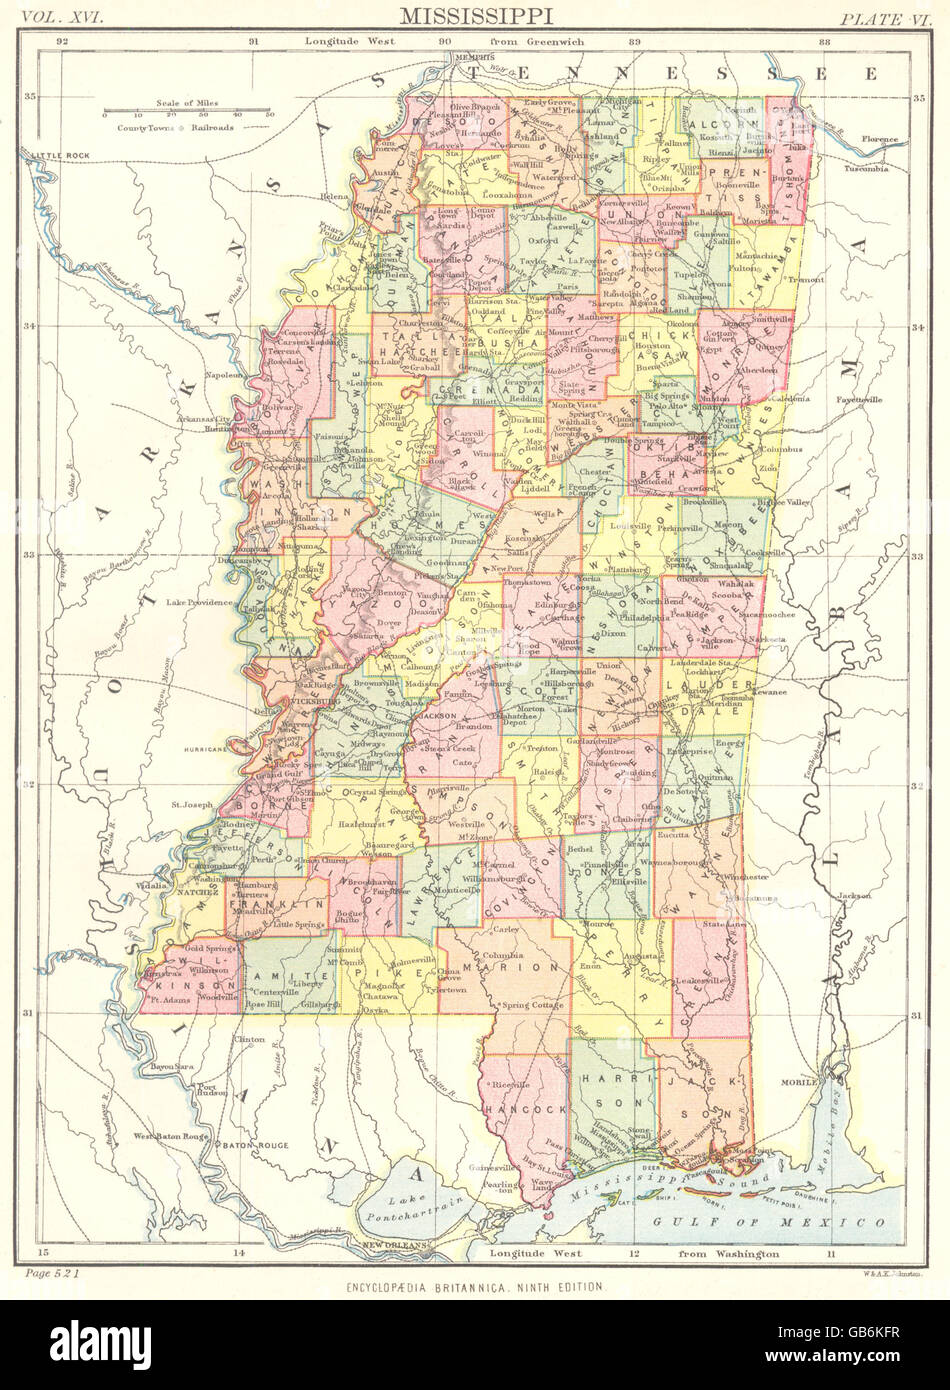 MISSISSIPPI: State map showing counties. Britannica 9th edition, 1898 Stock Photo